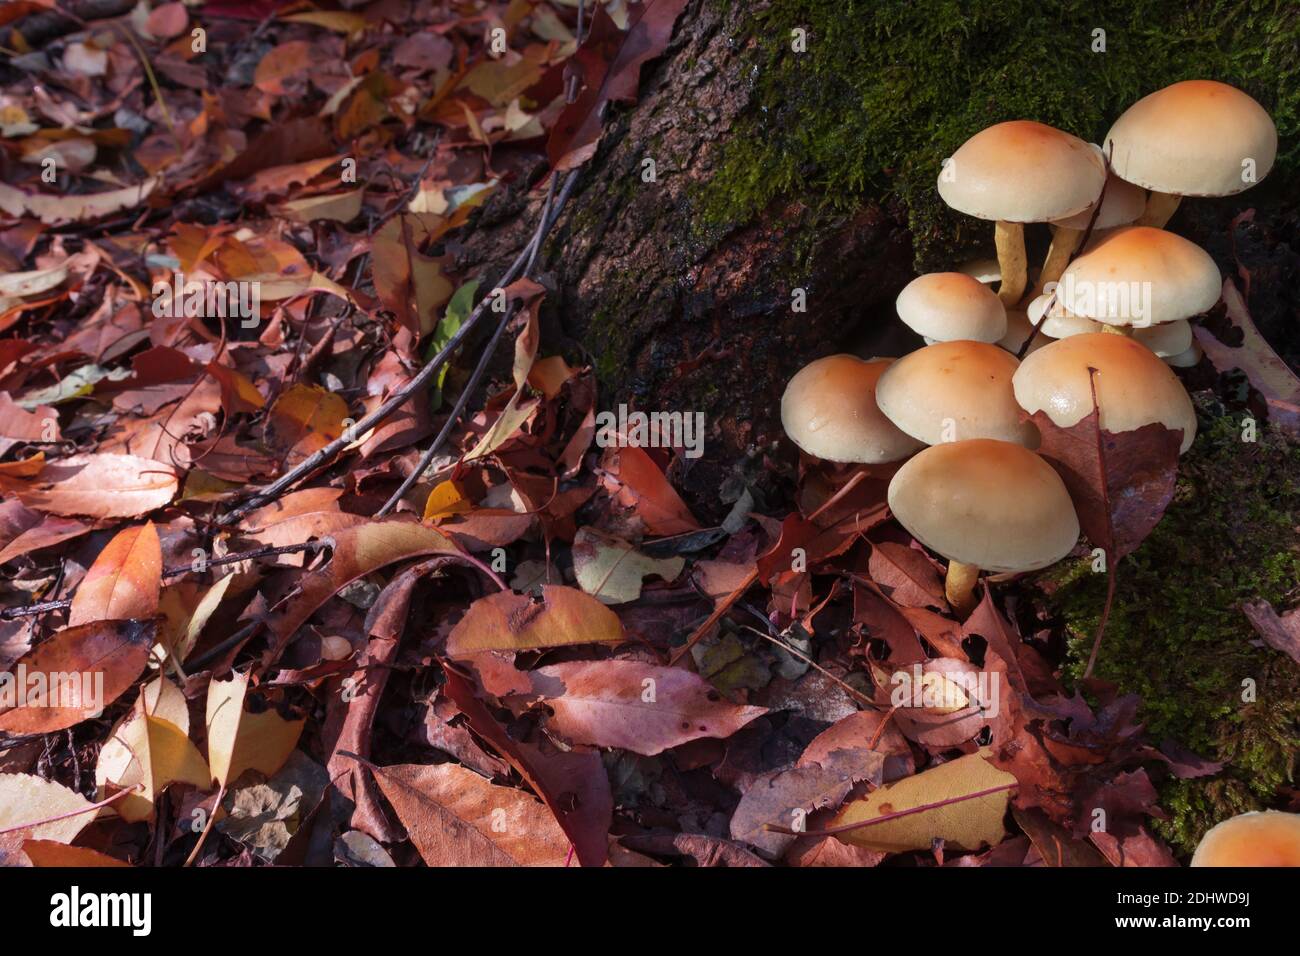 Group of Hypholoma fasciculare mushrooms (commonly known as the sulphur tuft or clustered woodlover) on a tree trunk among leaves Stock Photo